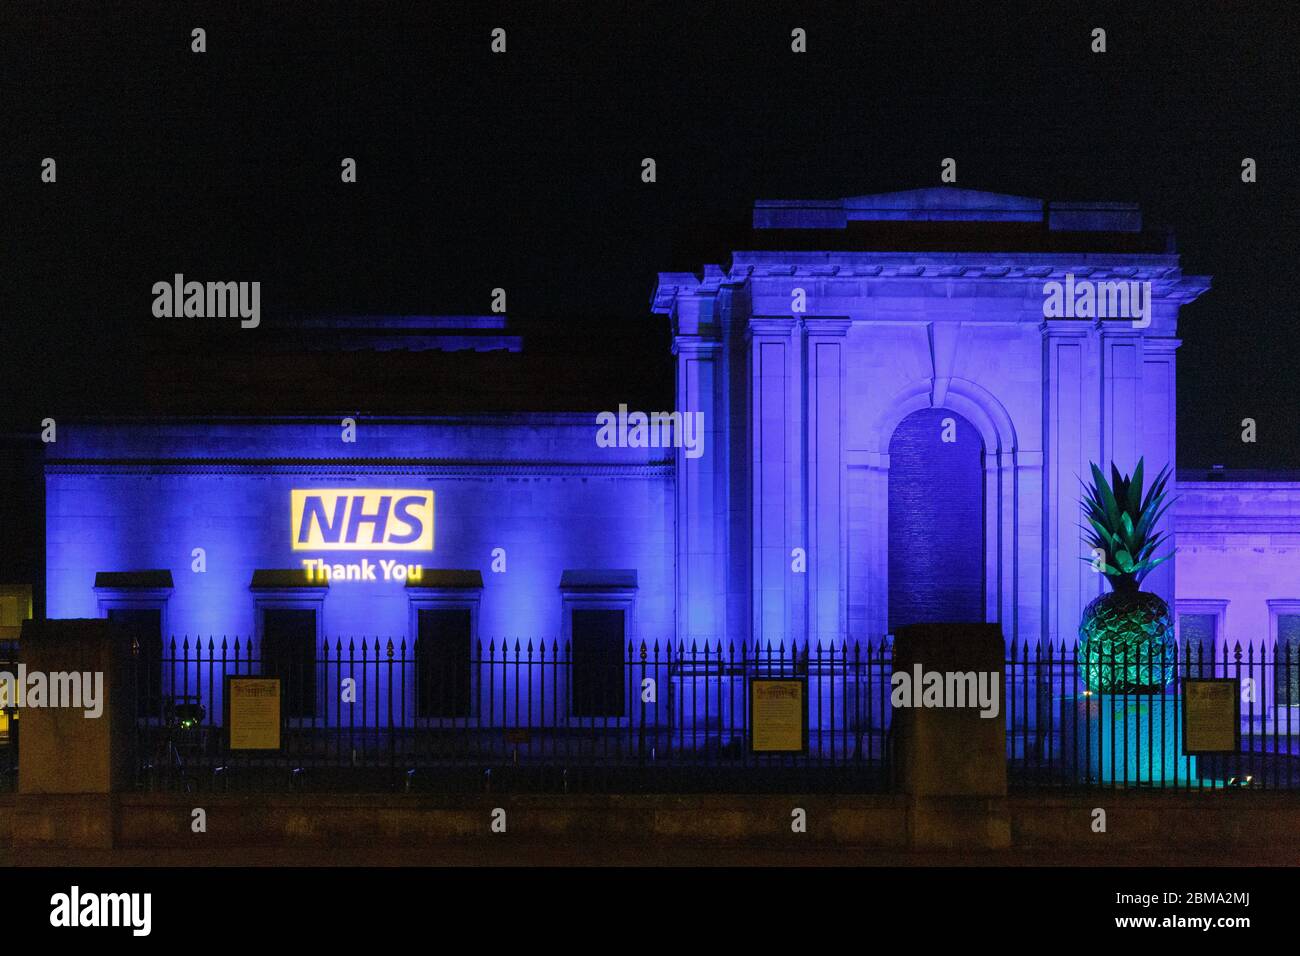 Cambridge, UK. 7th May 2020. Fitzwilliam Museum lit up in blue to express thanks to all frontline NHS health staff during Coronavirus lockdown. Cam News/Alamy Live News Stock Photo